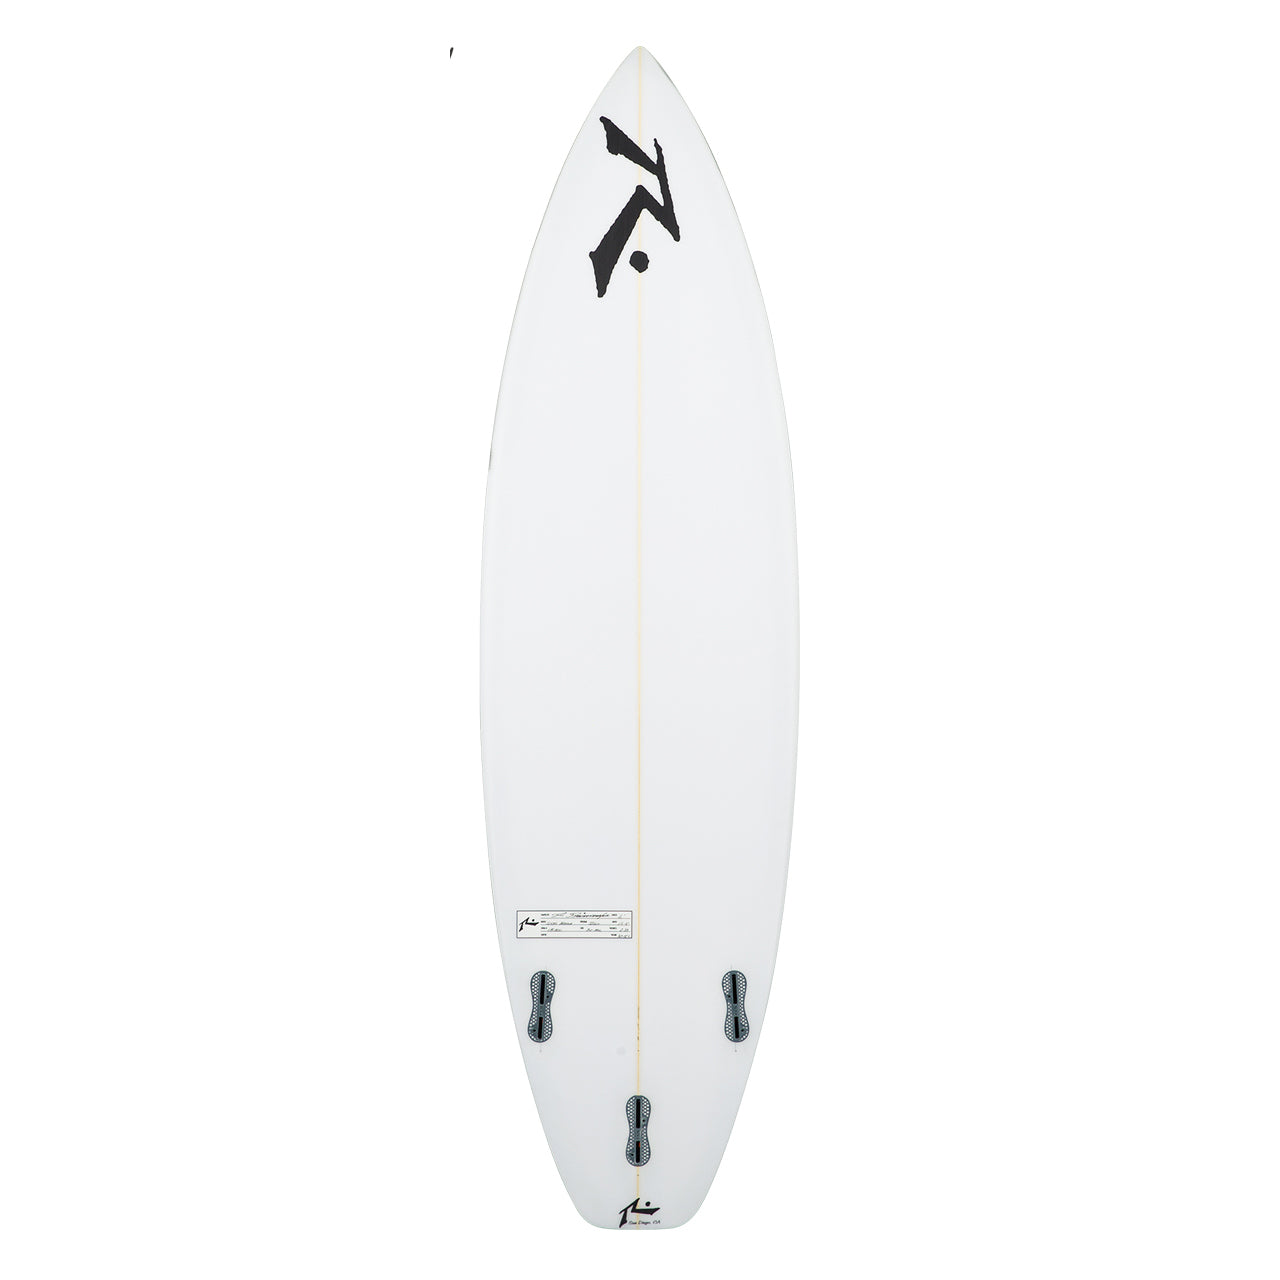 Sista Brotha - High Performance Shortboards - Rusty Surfboards - Top View